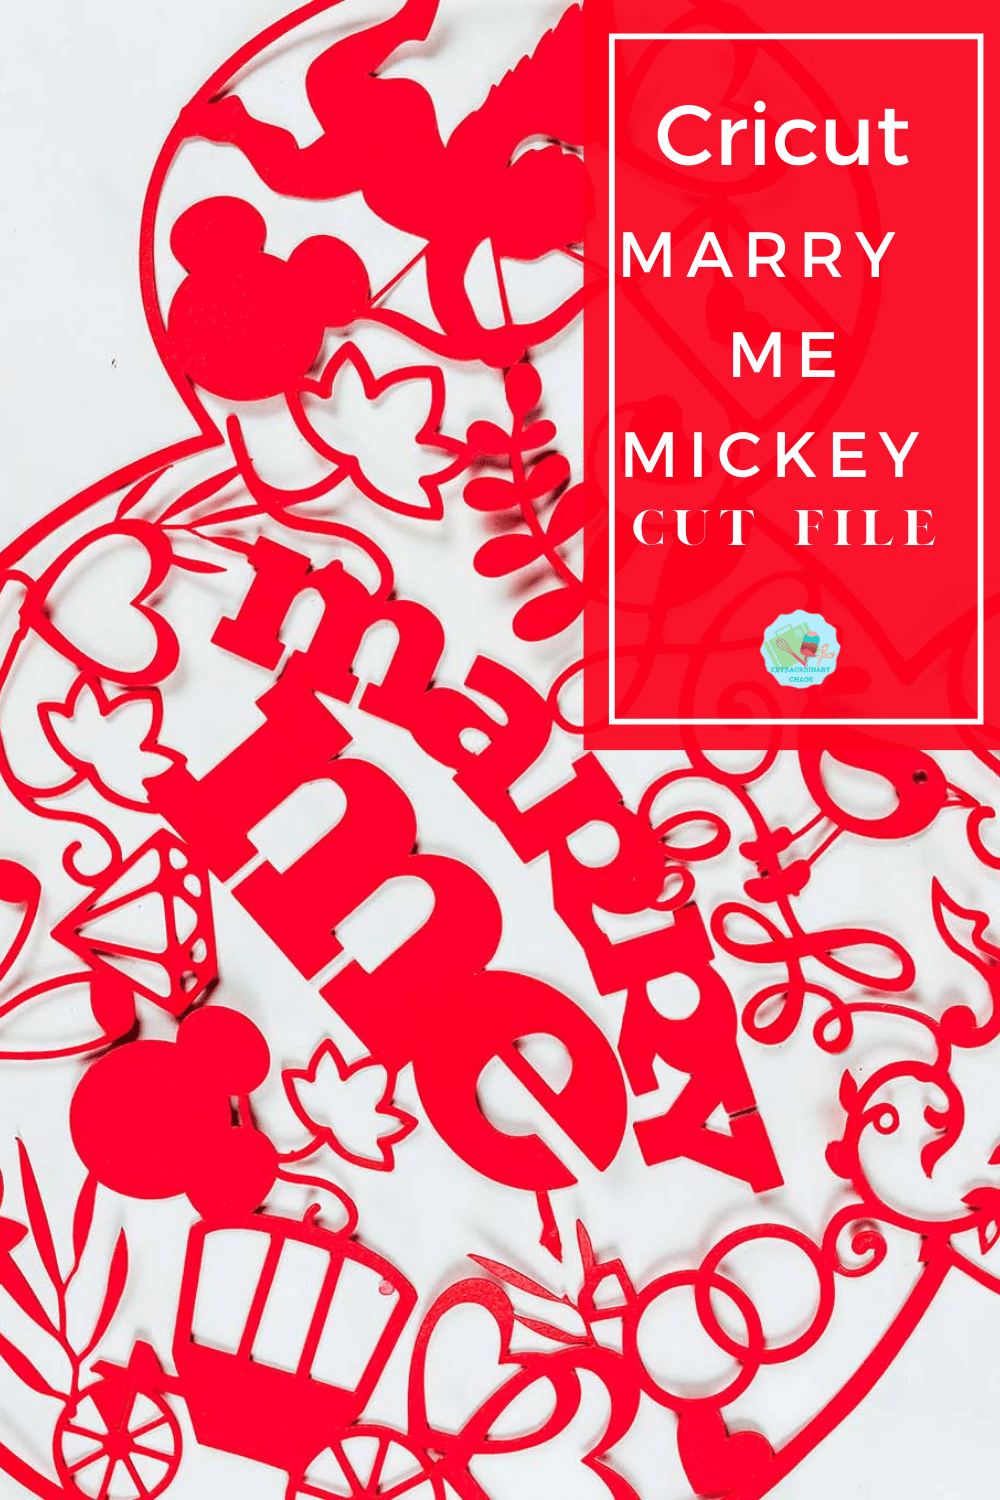 Mickey Marry Me Cut File Wedding Proposals